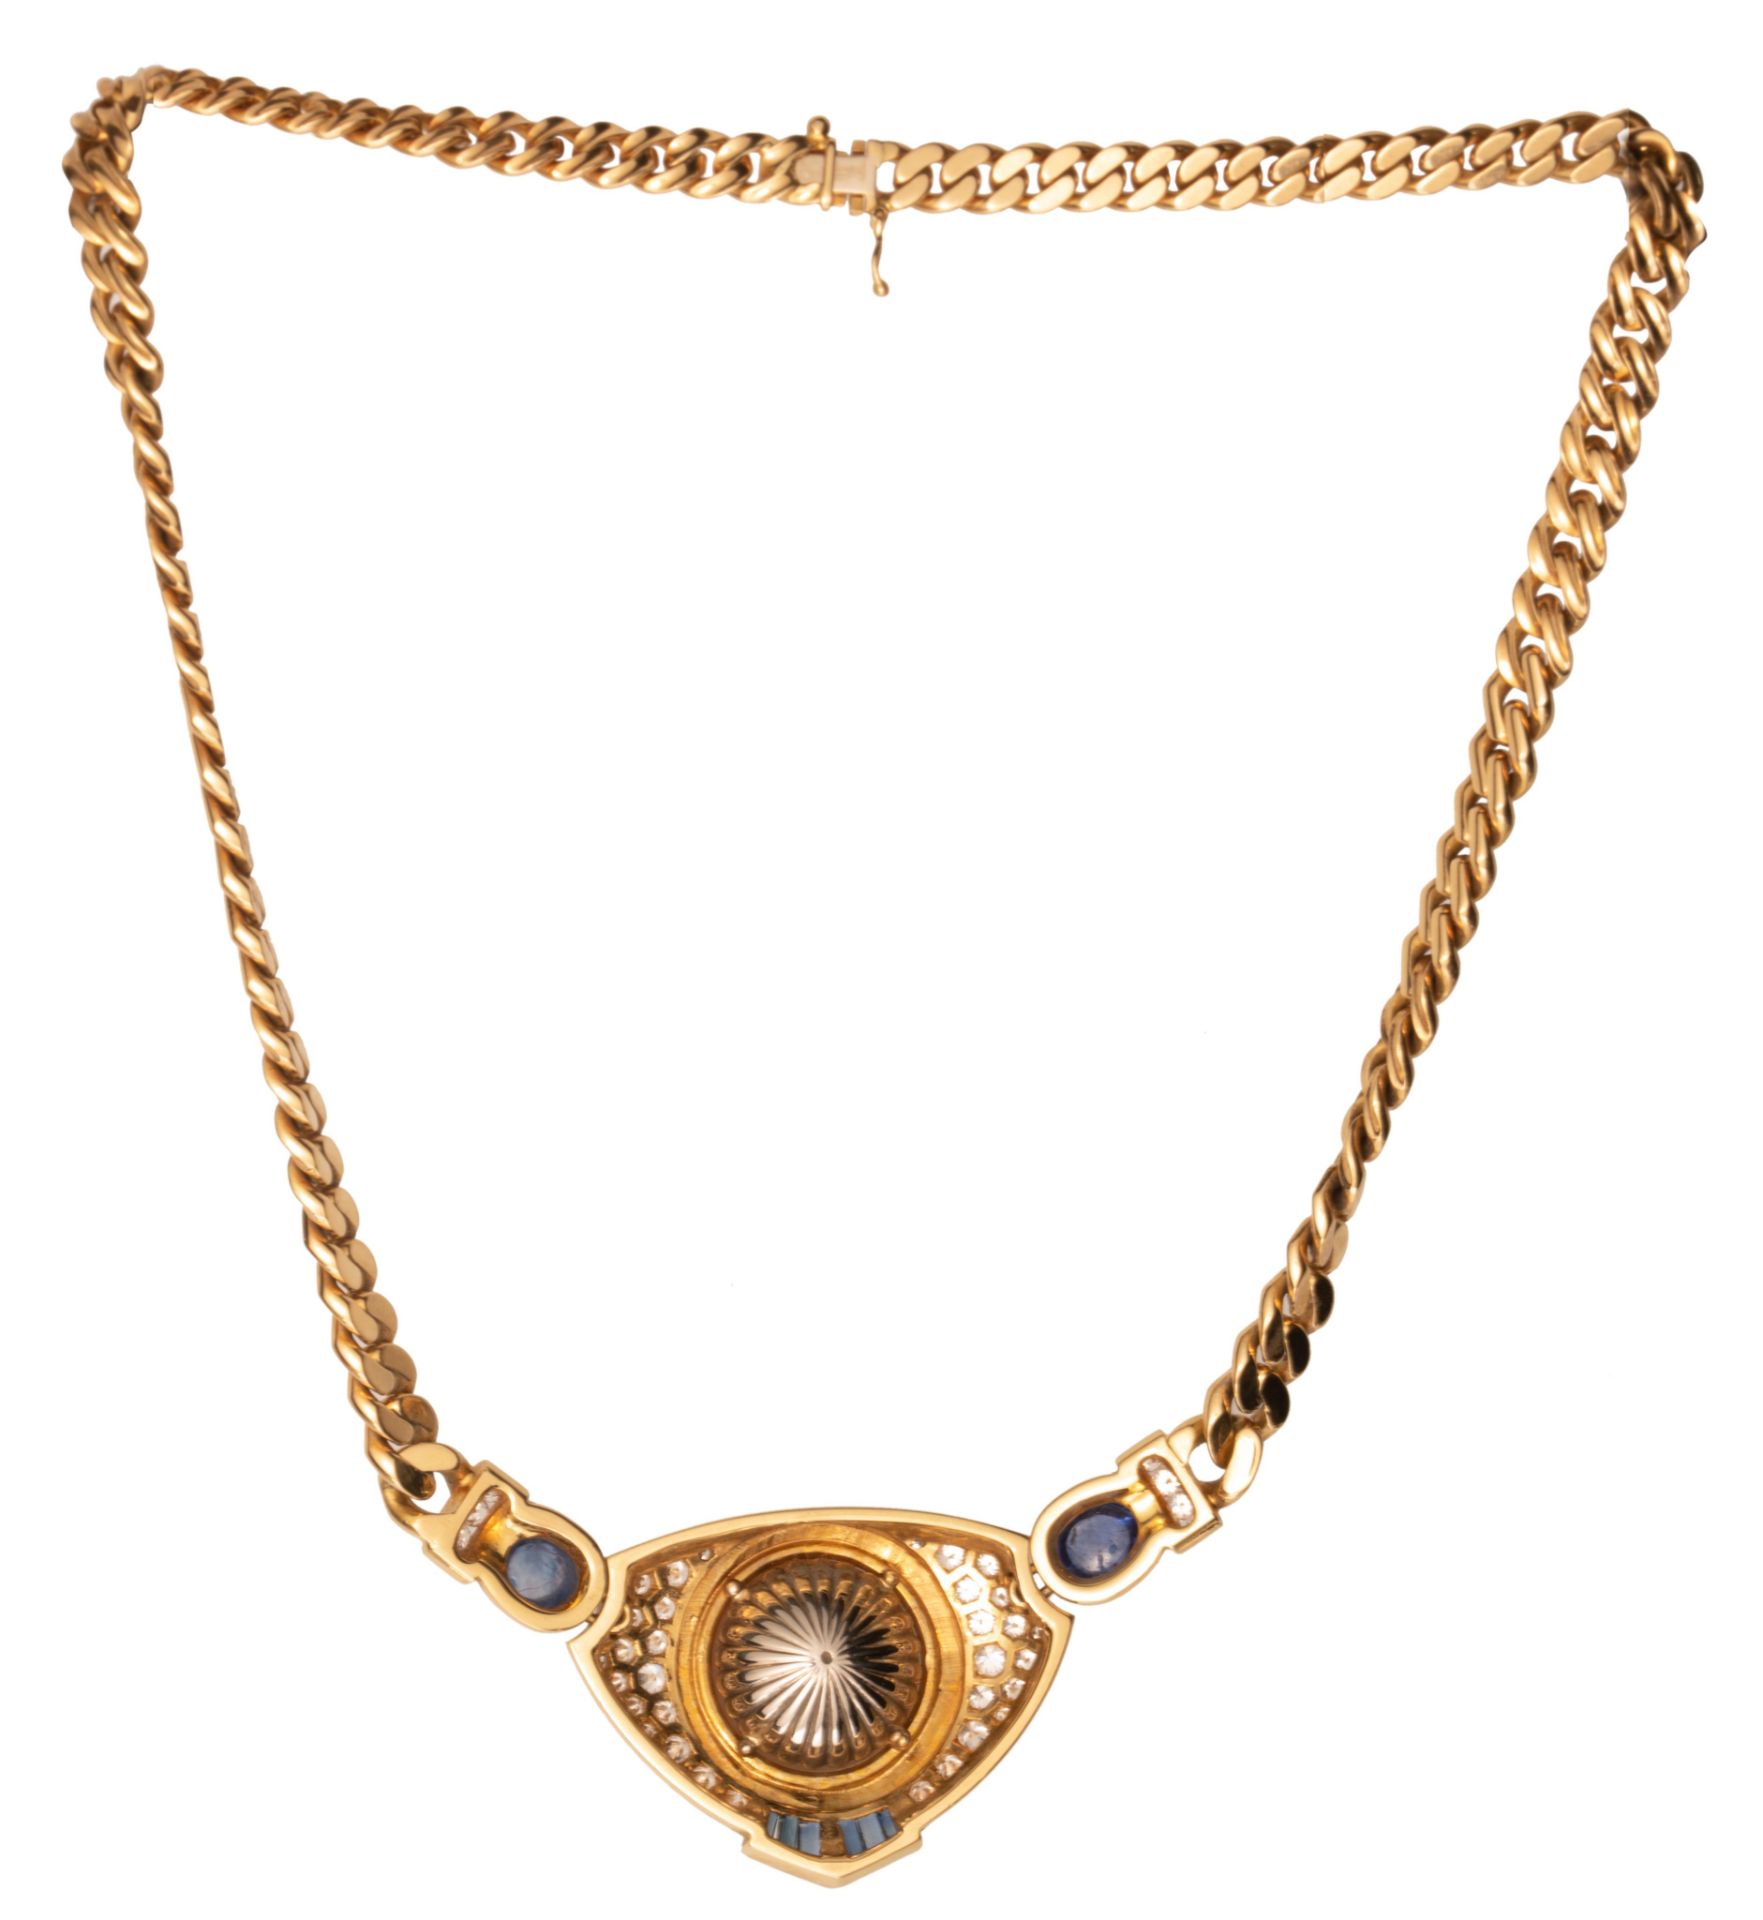 An 18ct yellow gold necklace, set with a mabe pearl, diamonds and blue sapphires, 65 g - Image 2 of 4